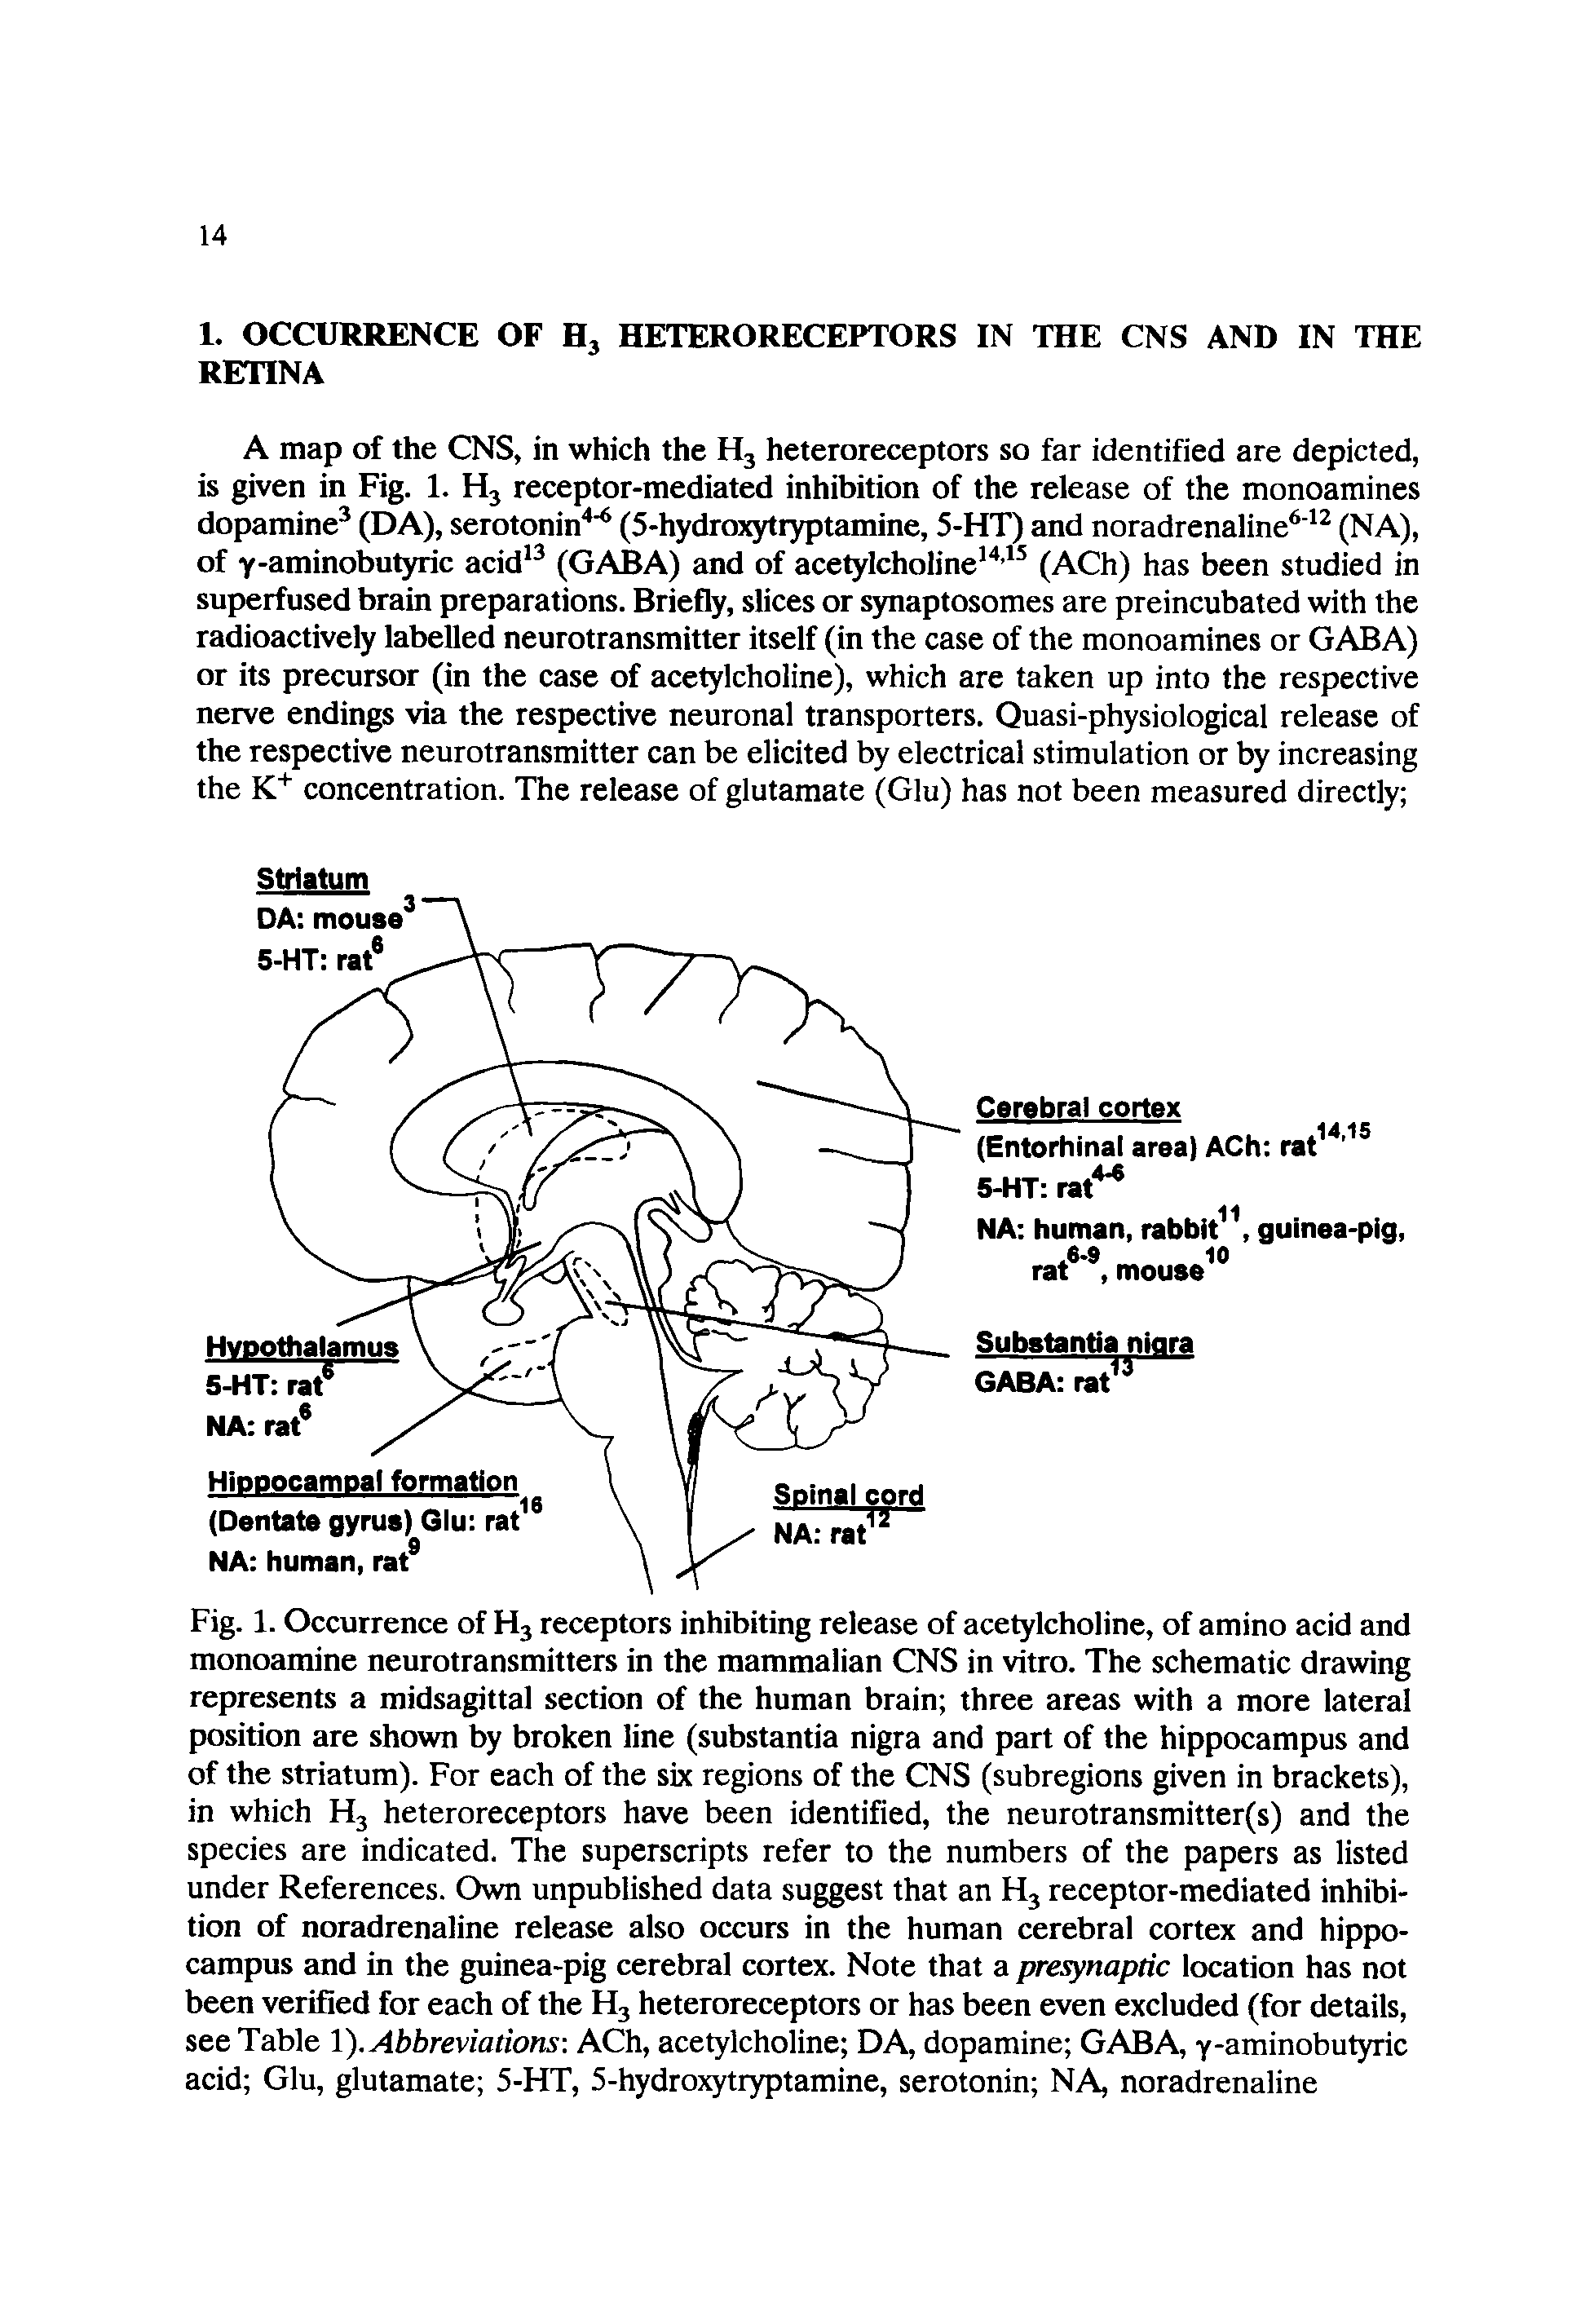 Fig. 1. Occurrence of H3 receptors inhibiting release of acetylcholine, of amino acid and monoamine neurotransmitters in the mammalian CNS in vitro. The schematic drawing represents a midsagittal section of the human brain three areas with a more lateral position are shown by broken line (substantia nigra and part of the hippocampus and of the striatum). For each of the six regions of the CNS (subregions given in brackets), in which H3 heteroreceptors have been identified, the neurotransmitter(s) and the species are indicated. The superscripts refer to the numbers of the papers as listed under References. Own unpublished data suggest that an H3 receptor-mediated inhibition of noradrenaline release also occurs in the human cerebral cortex and hippocampus and in the guinea-pig cerebral cortex. Note that a presynaptic location has not been verified for each of the H3 heteroreceptors or has been even excluded (for details, see Table 1). Abbreviations ACh, acetylcholine DA, dopamine GABA, y-aminobutyric acid Glu, glutamate 5-HT, 5-hydroxytryptamine, serotonin NA, noradrenaline...